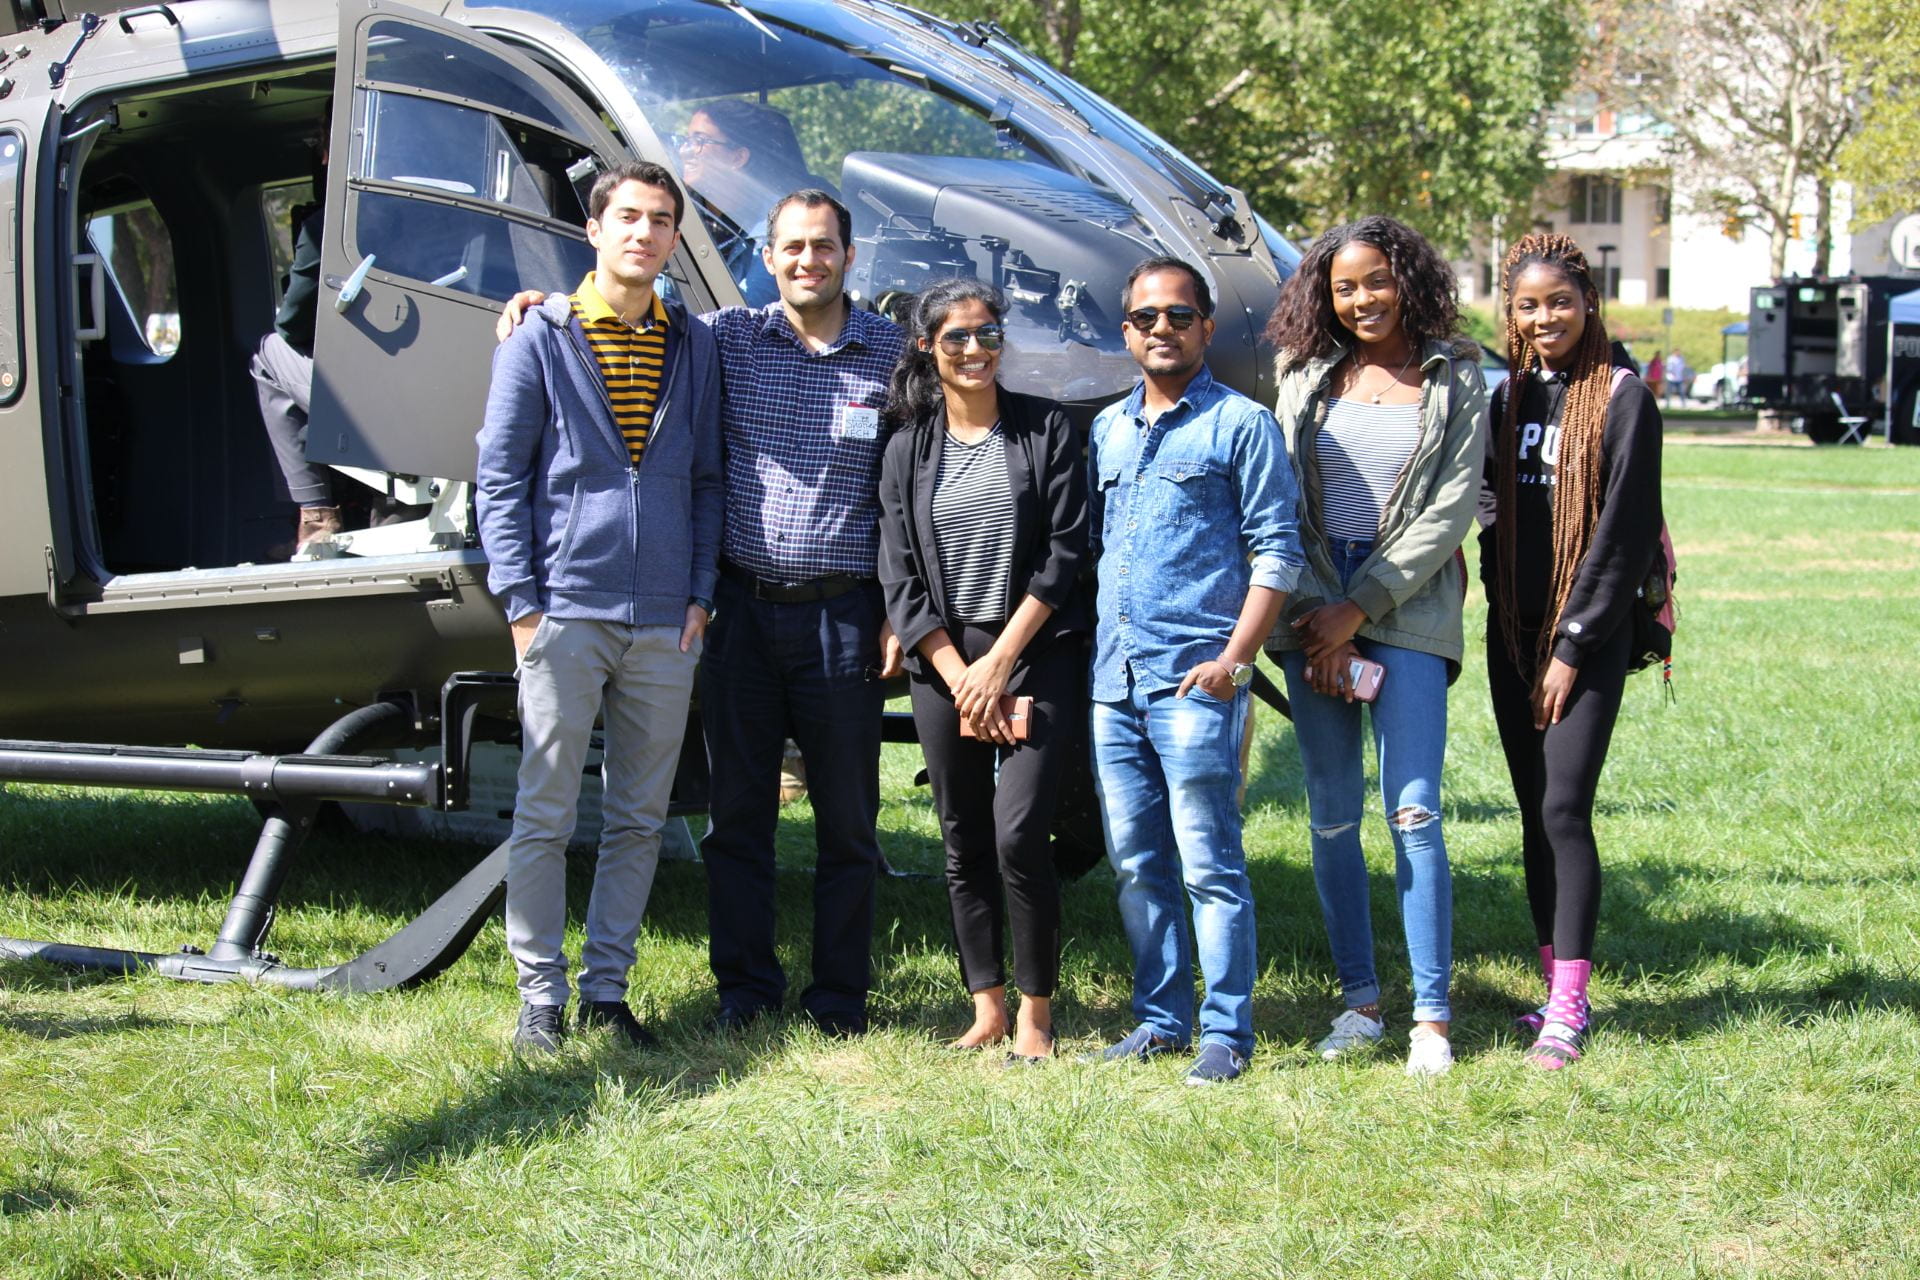 Students stand in front of a military helicopter during Public Safety Career Day 2018.